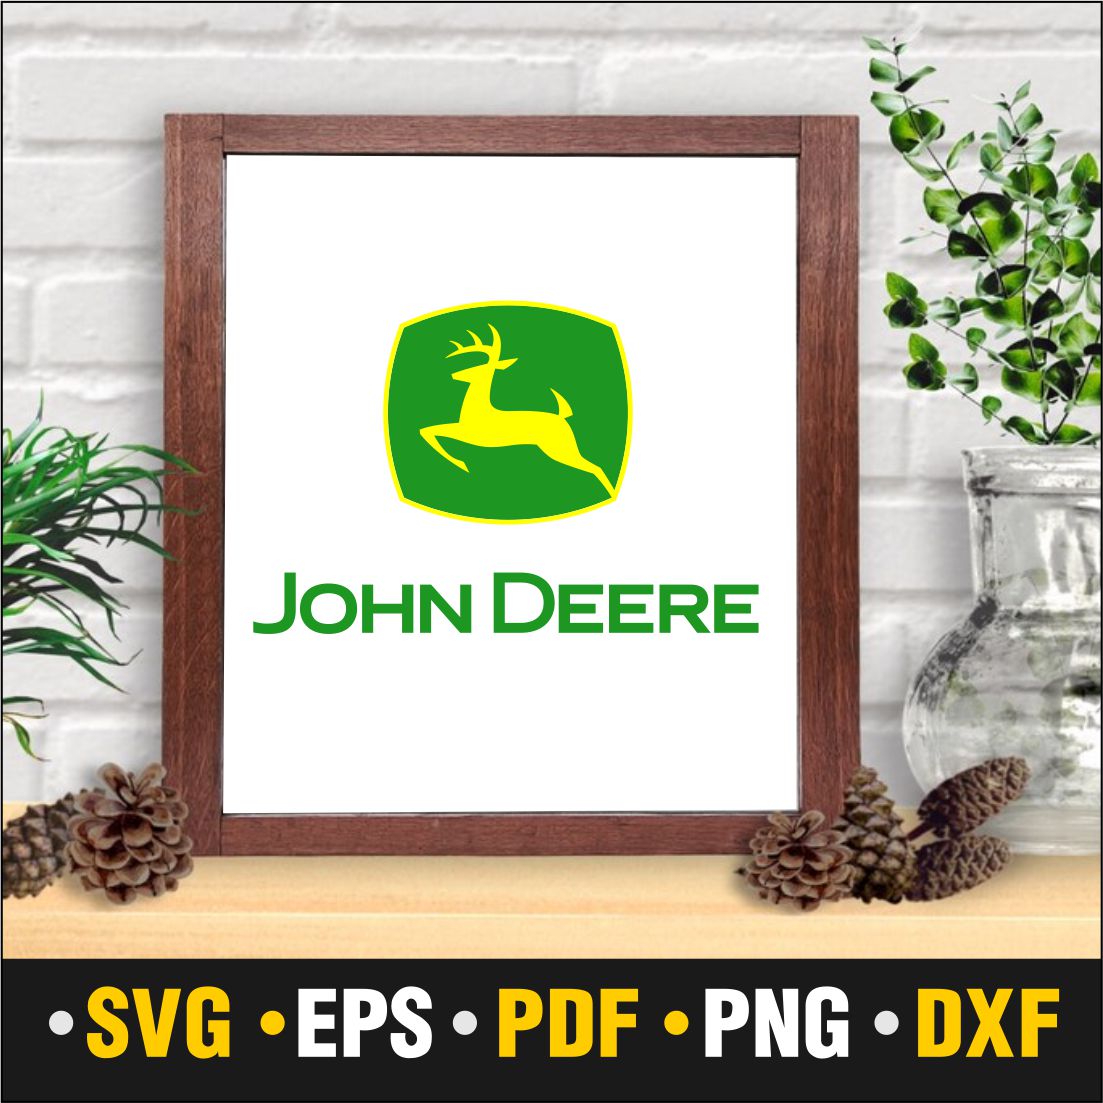 Picture of a deer with the john deere logo on it.